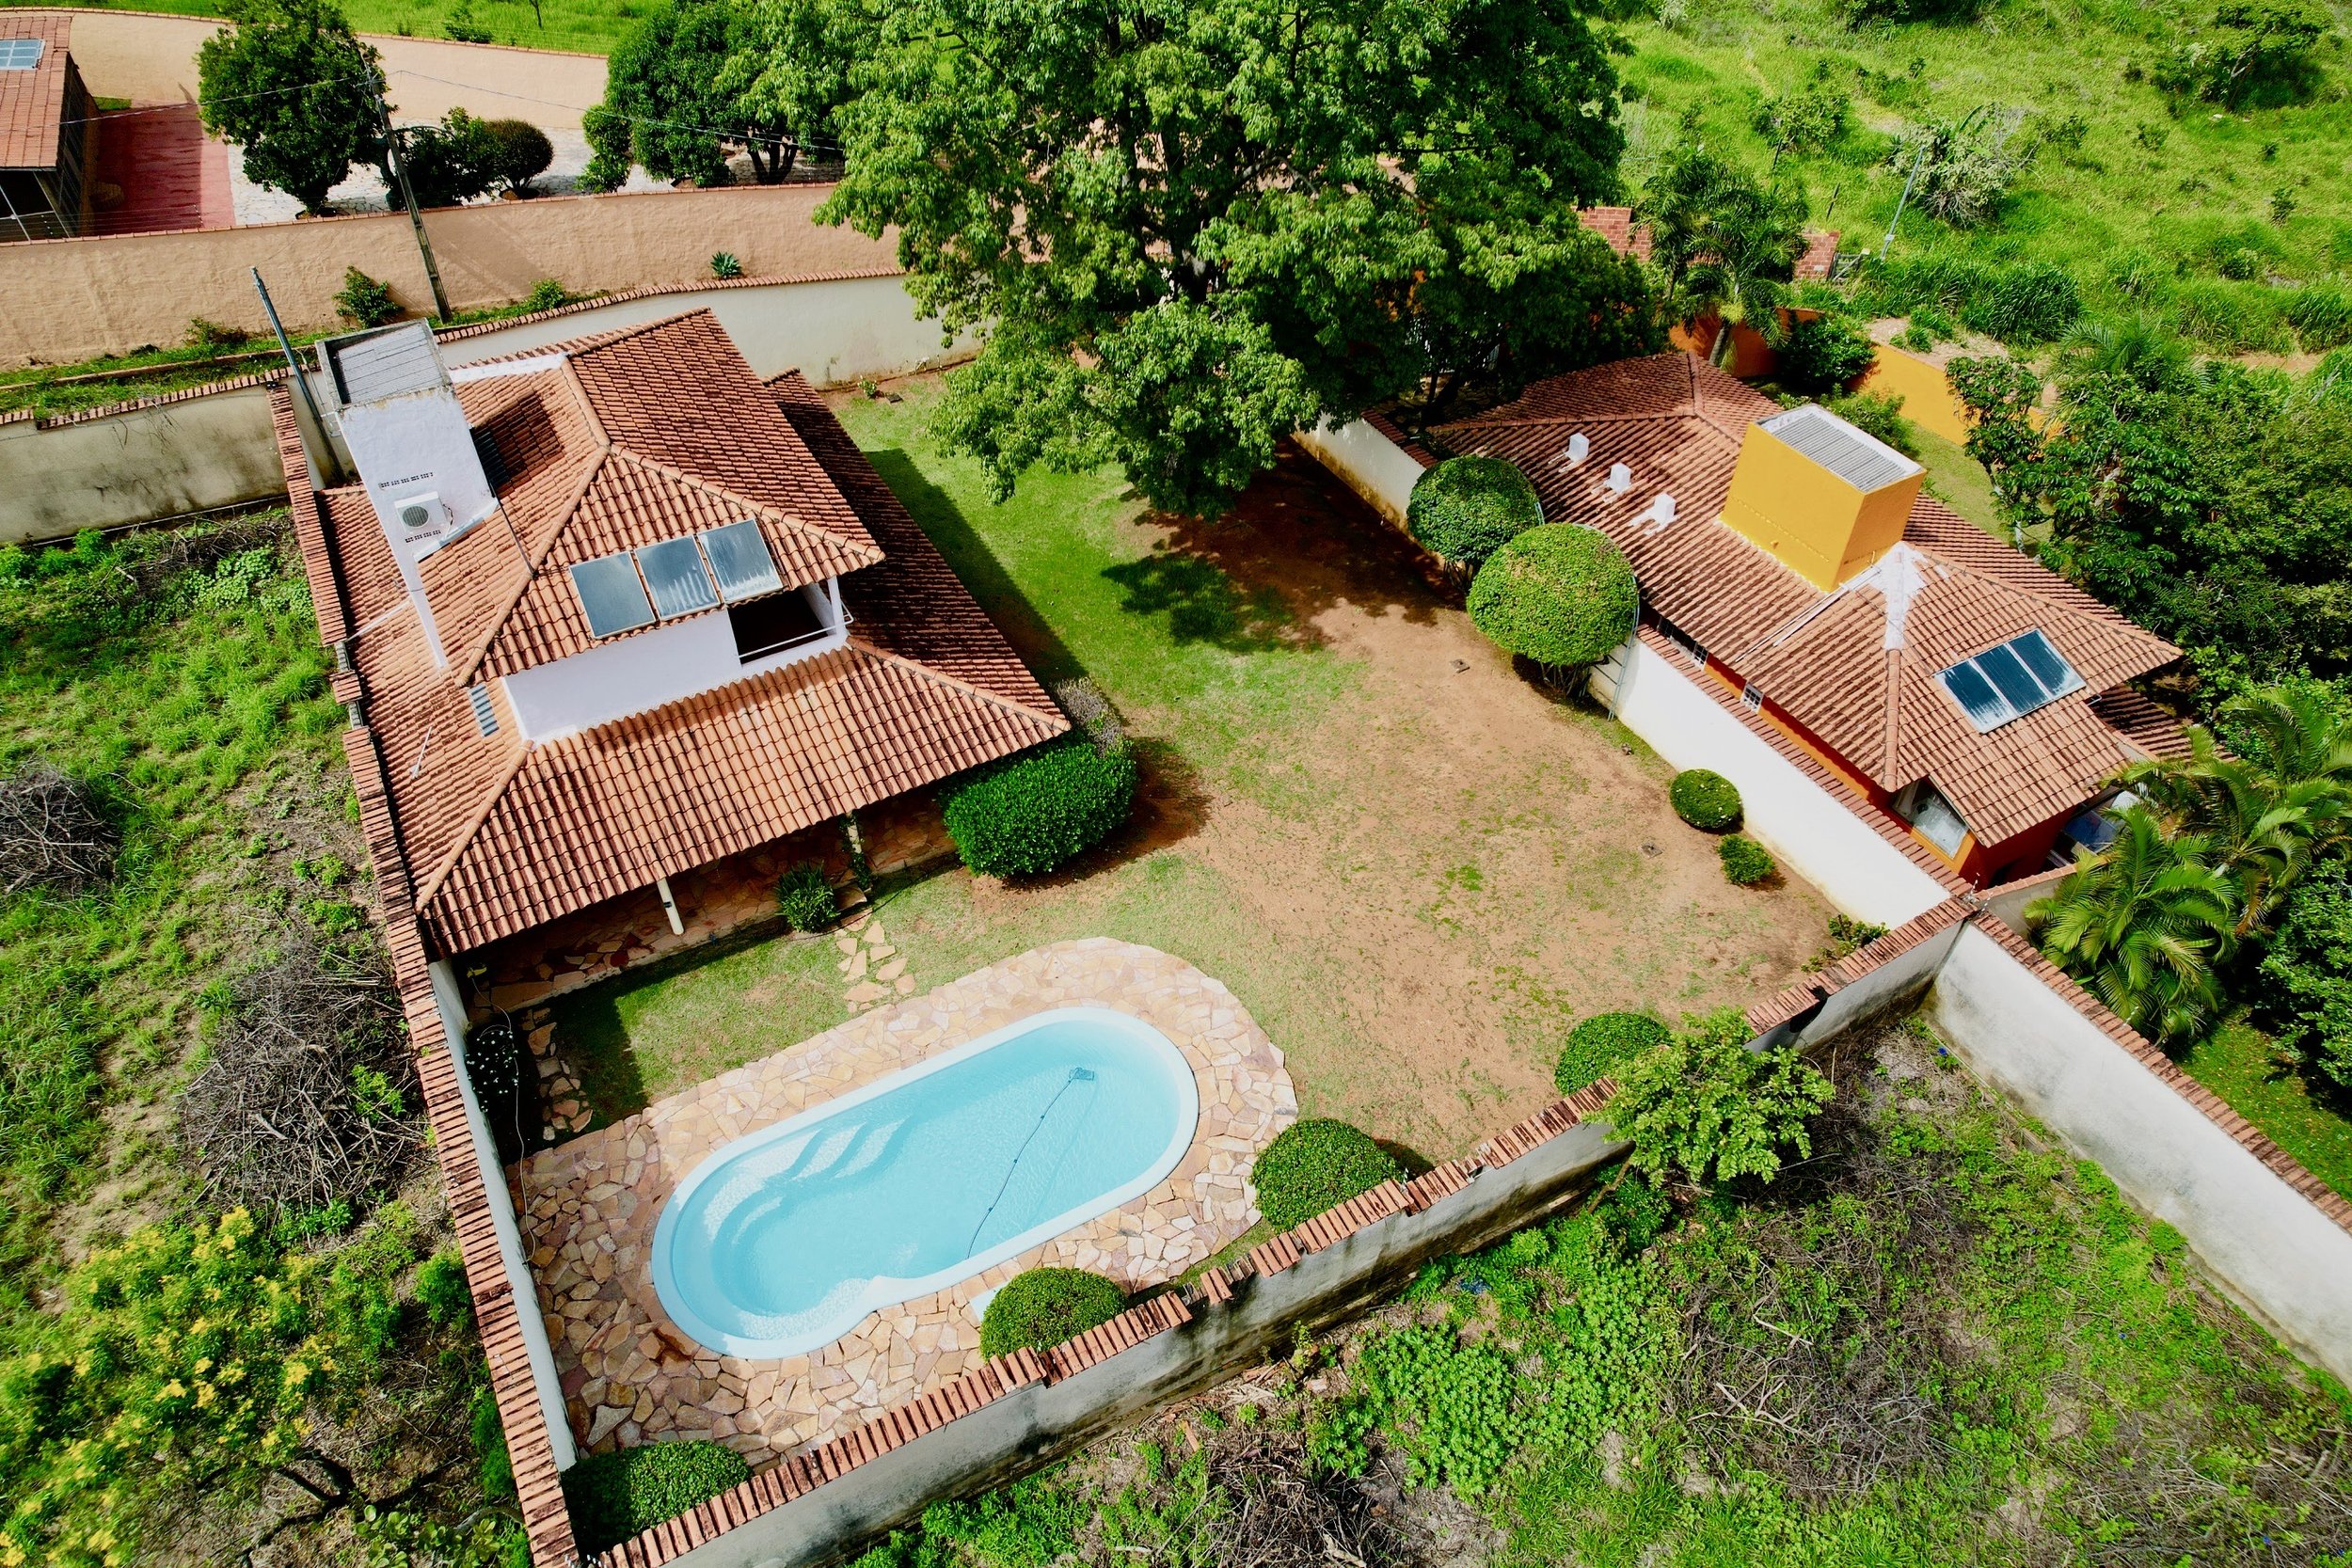 Casa de Luz - bird's-eye view; note that the house in front is on a deep downward sloping grade which prevents view blocking